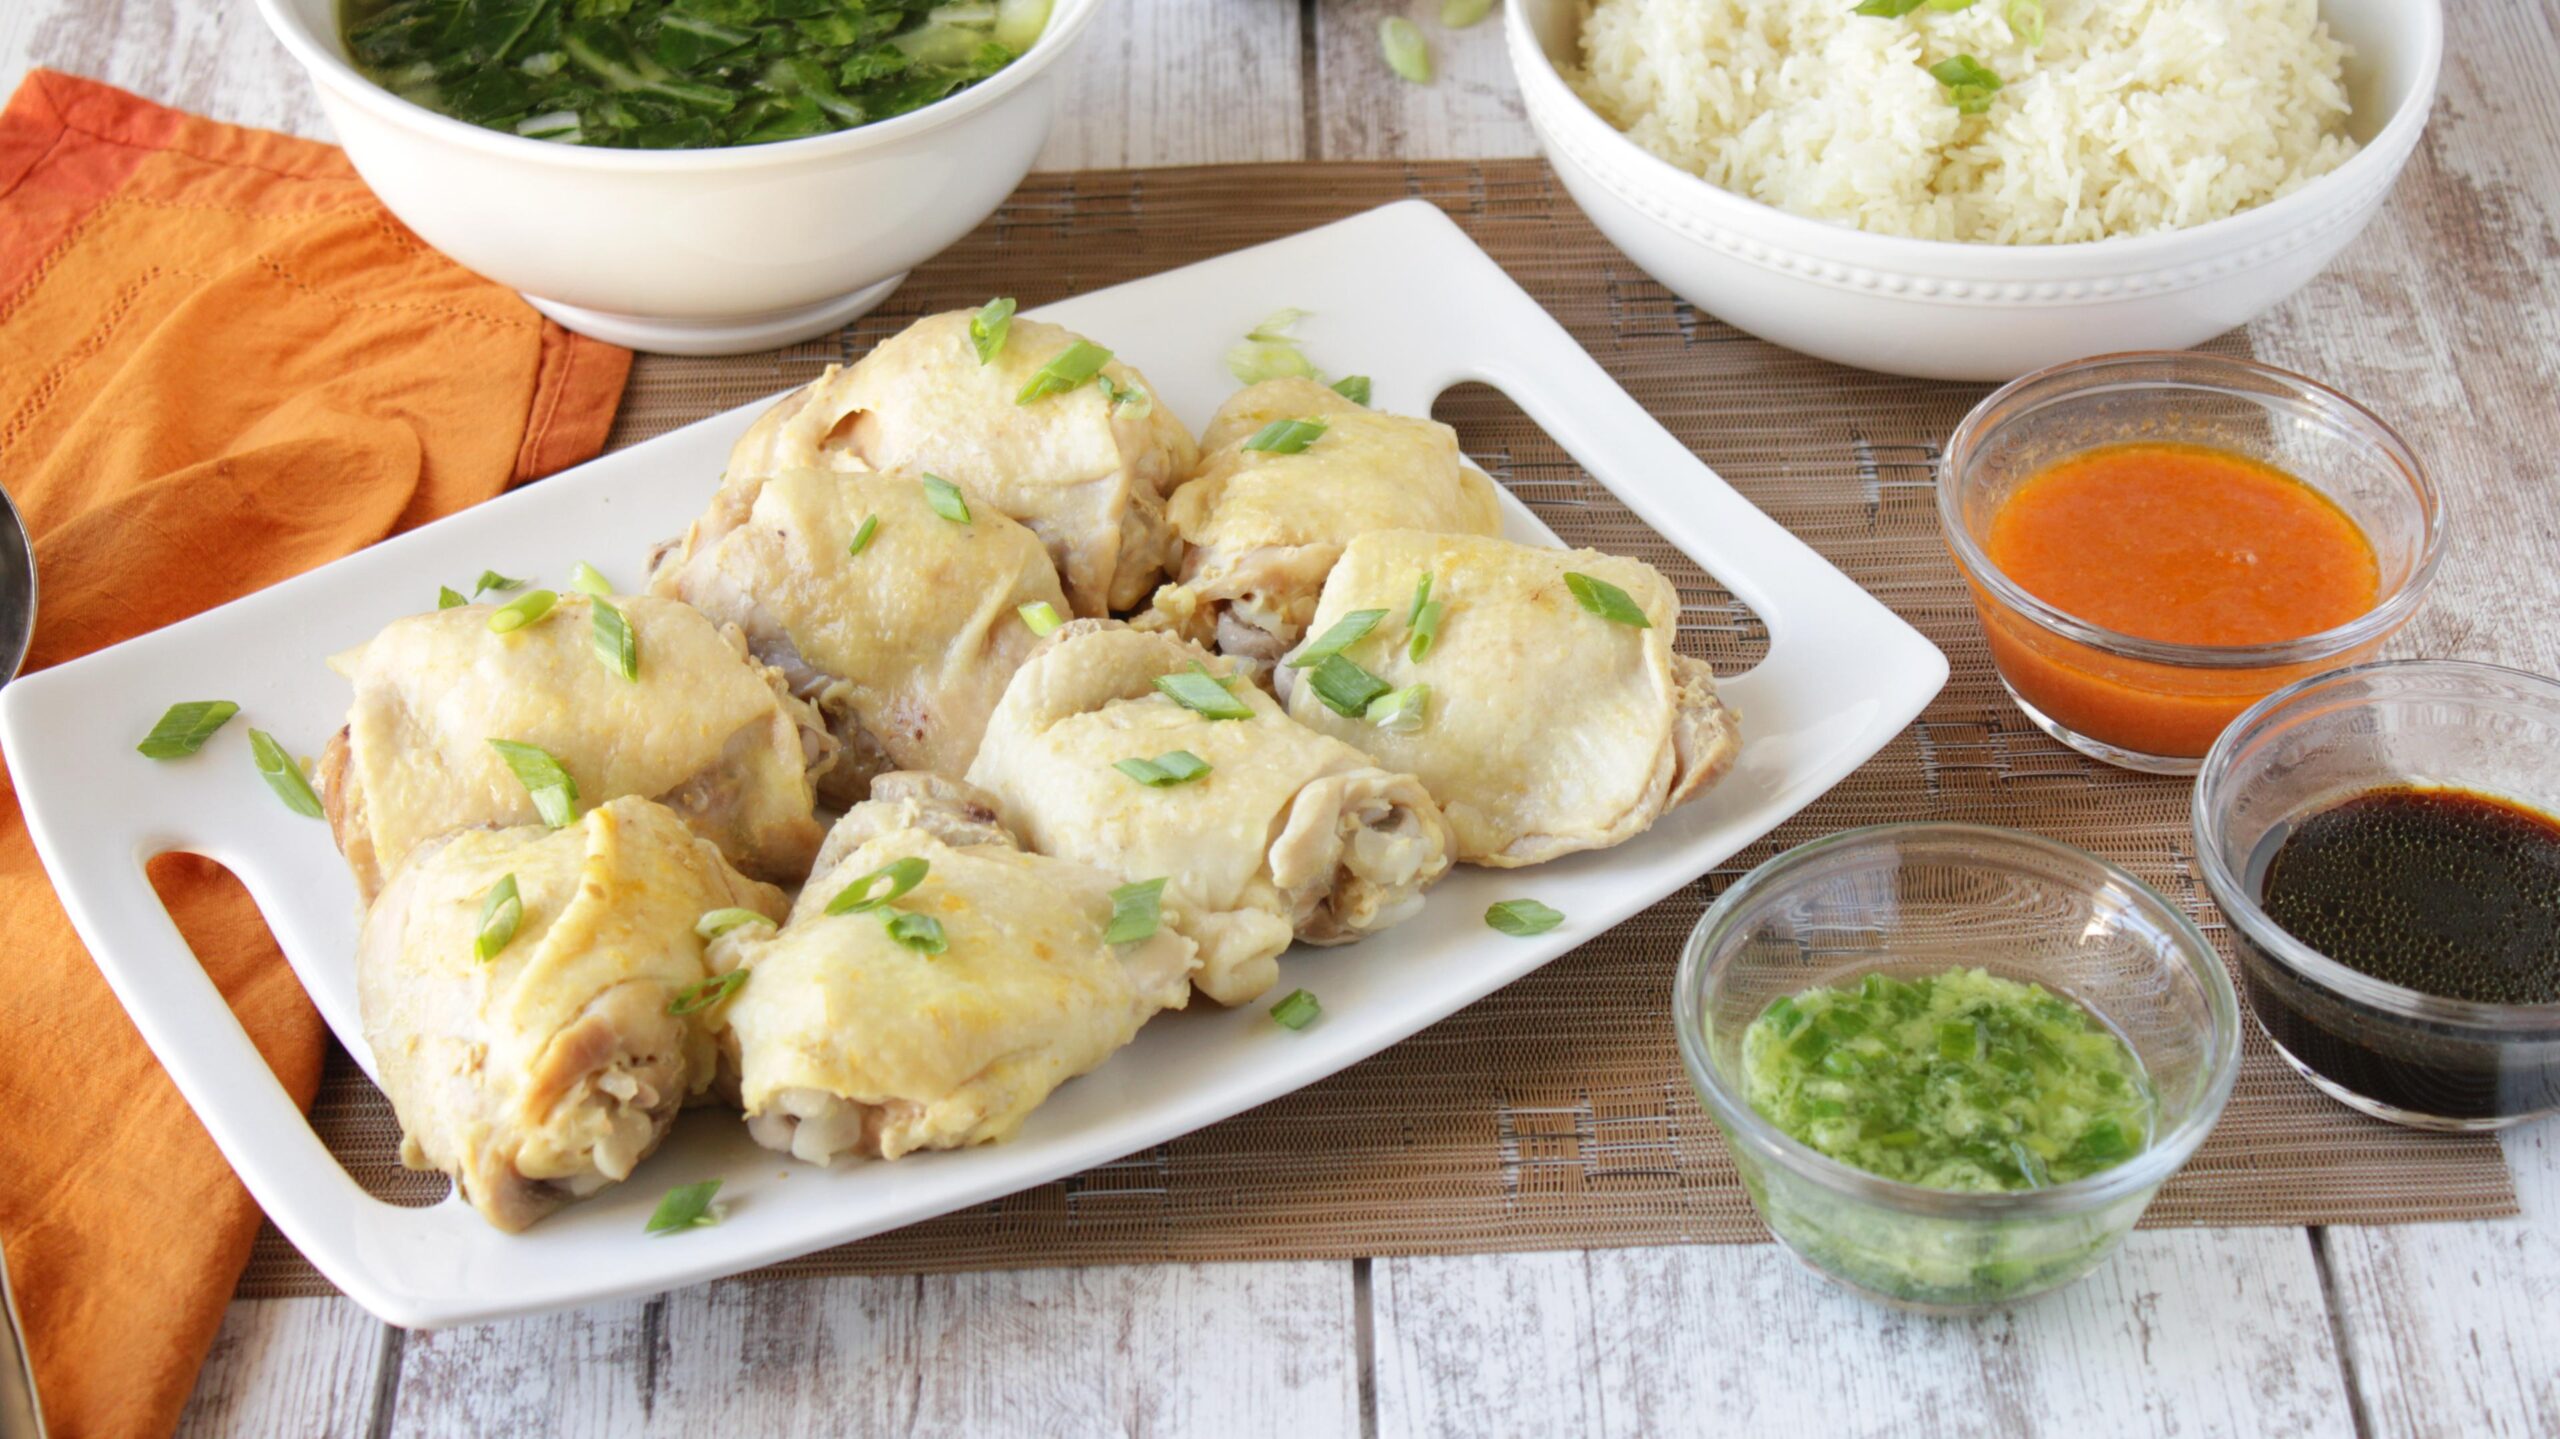 Delicious Hainanese Chicken and Rice Recipe